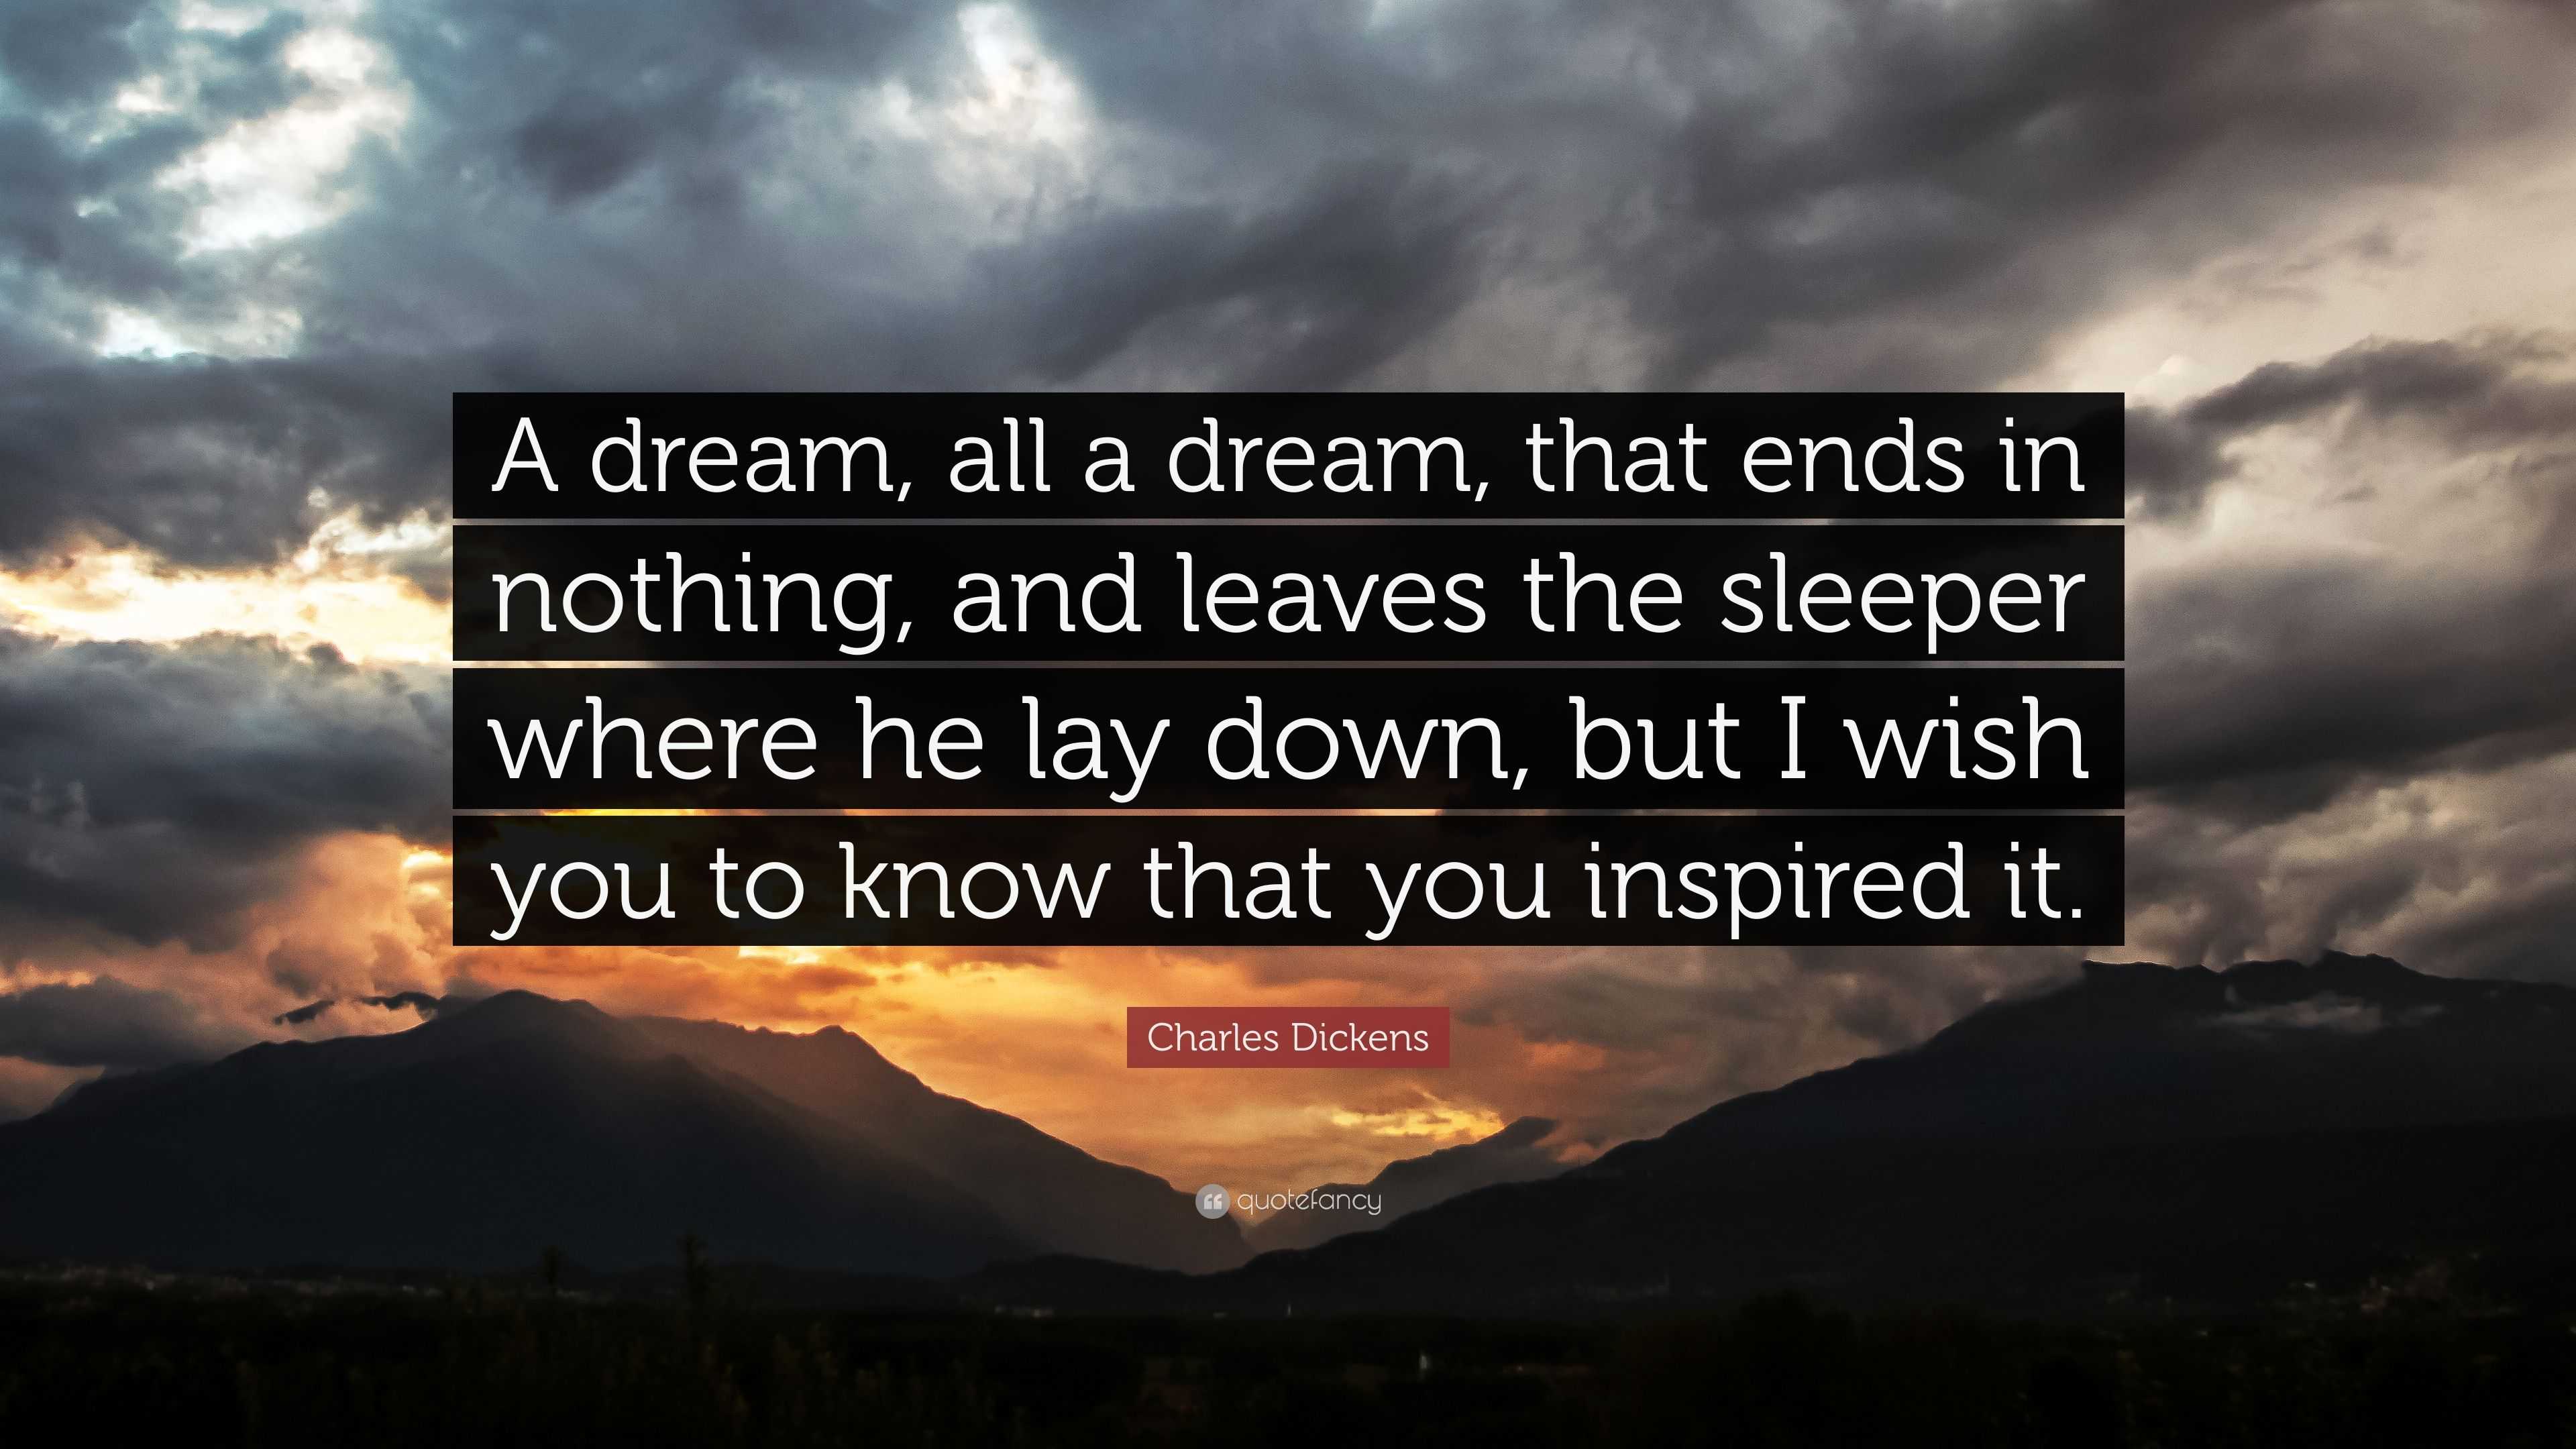 Charles Dickens Quote: “A dream, all a dream, that ends in nothing, and ...